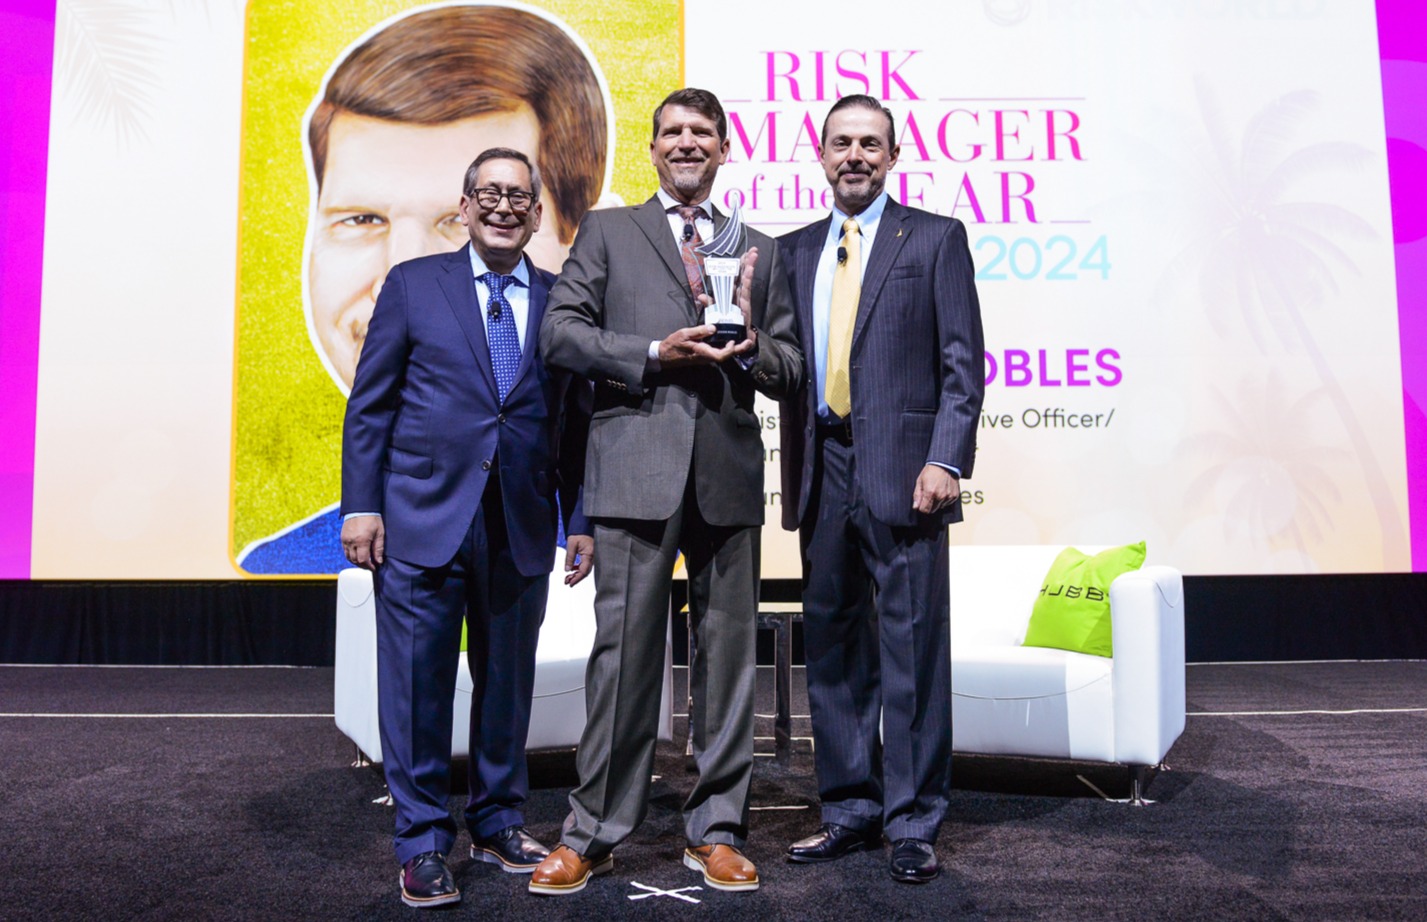 Steven Robles wins the RIMS 2024 Risk Manager of the Year Award